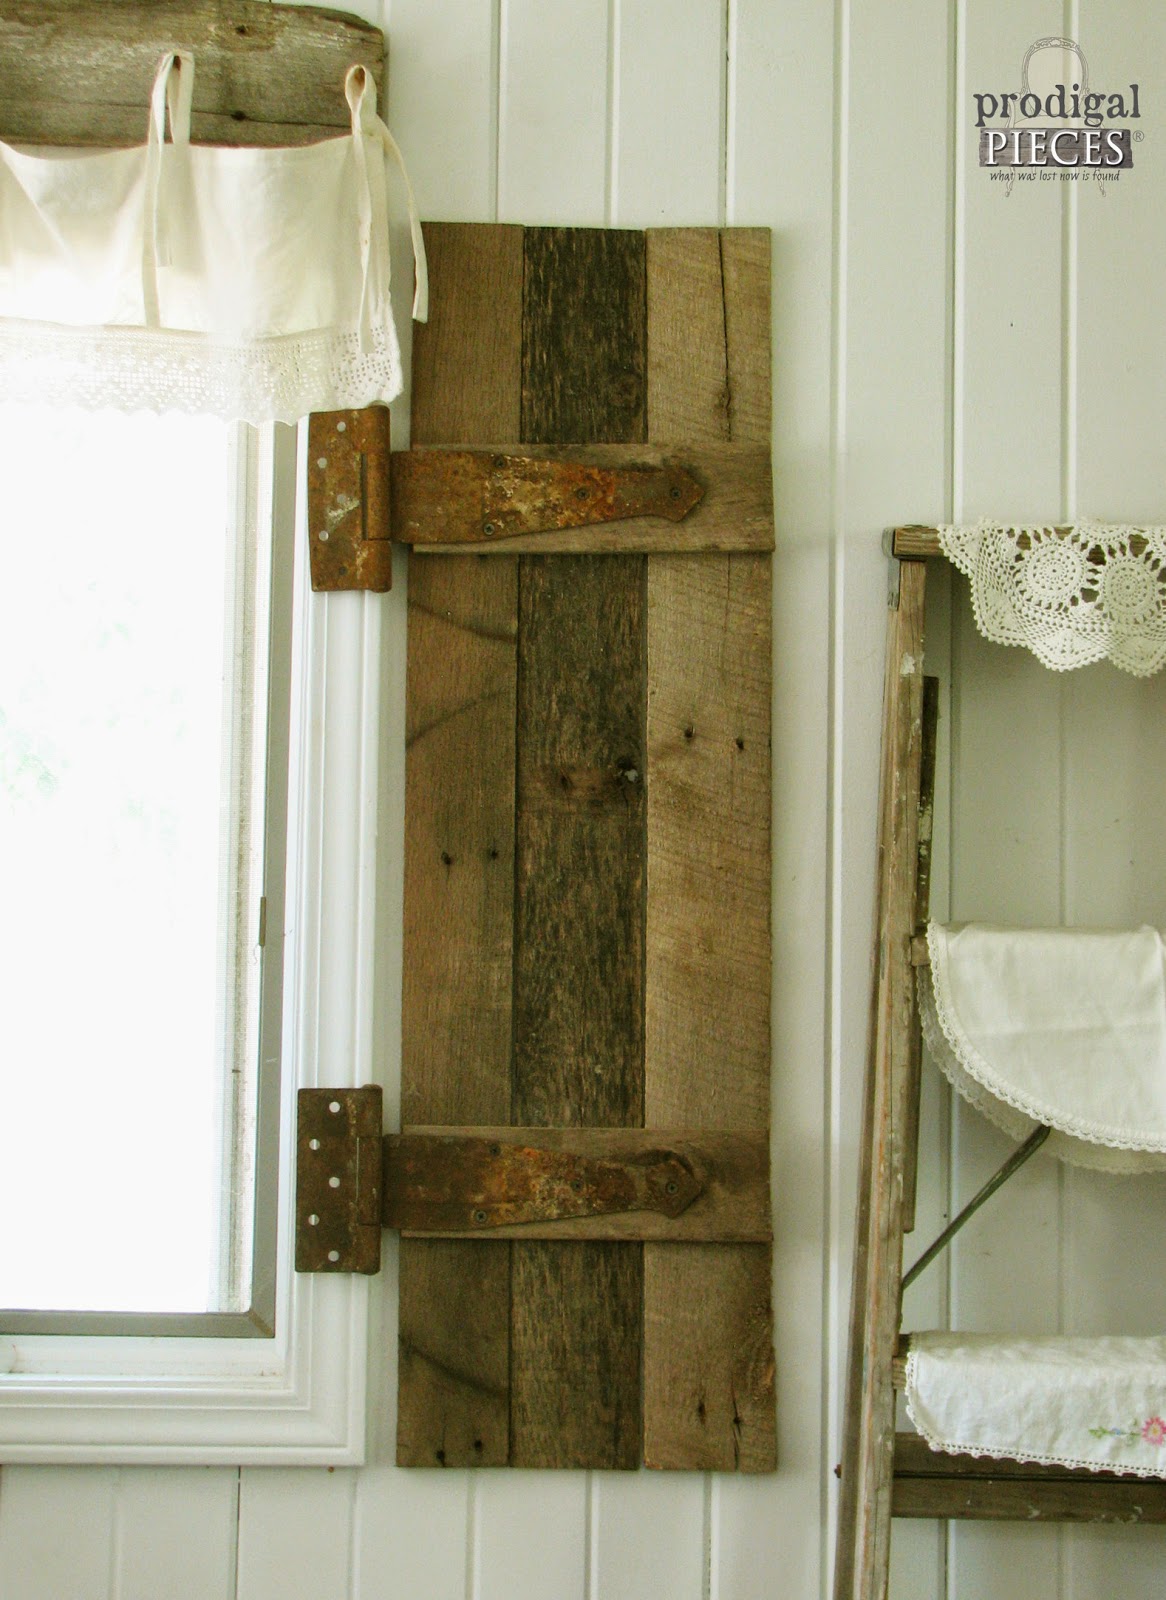 DIY Barn Wood Shutters from Repurposed Pallets by Prodigal Pieces http://www.prodigalpieces.com